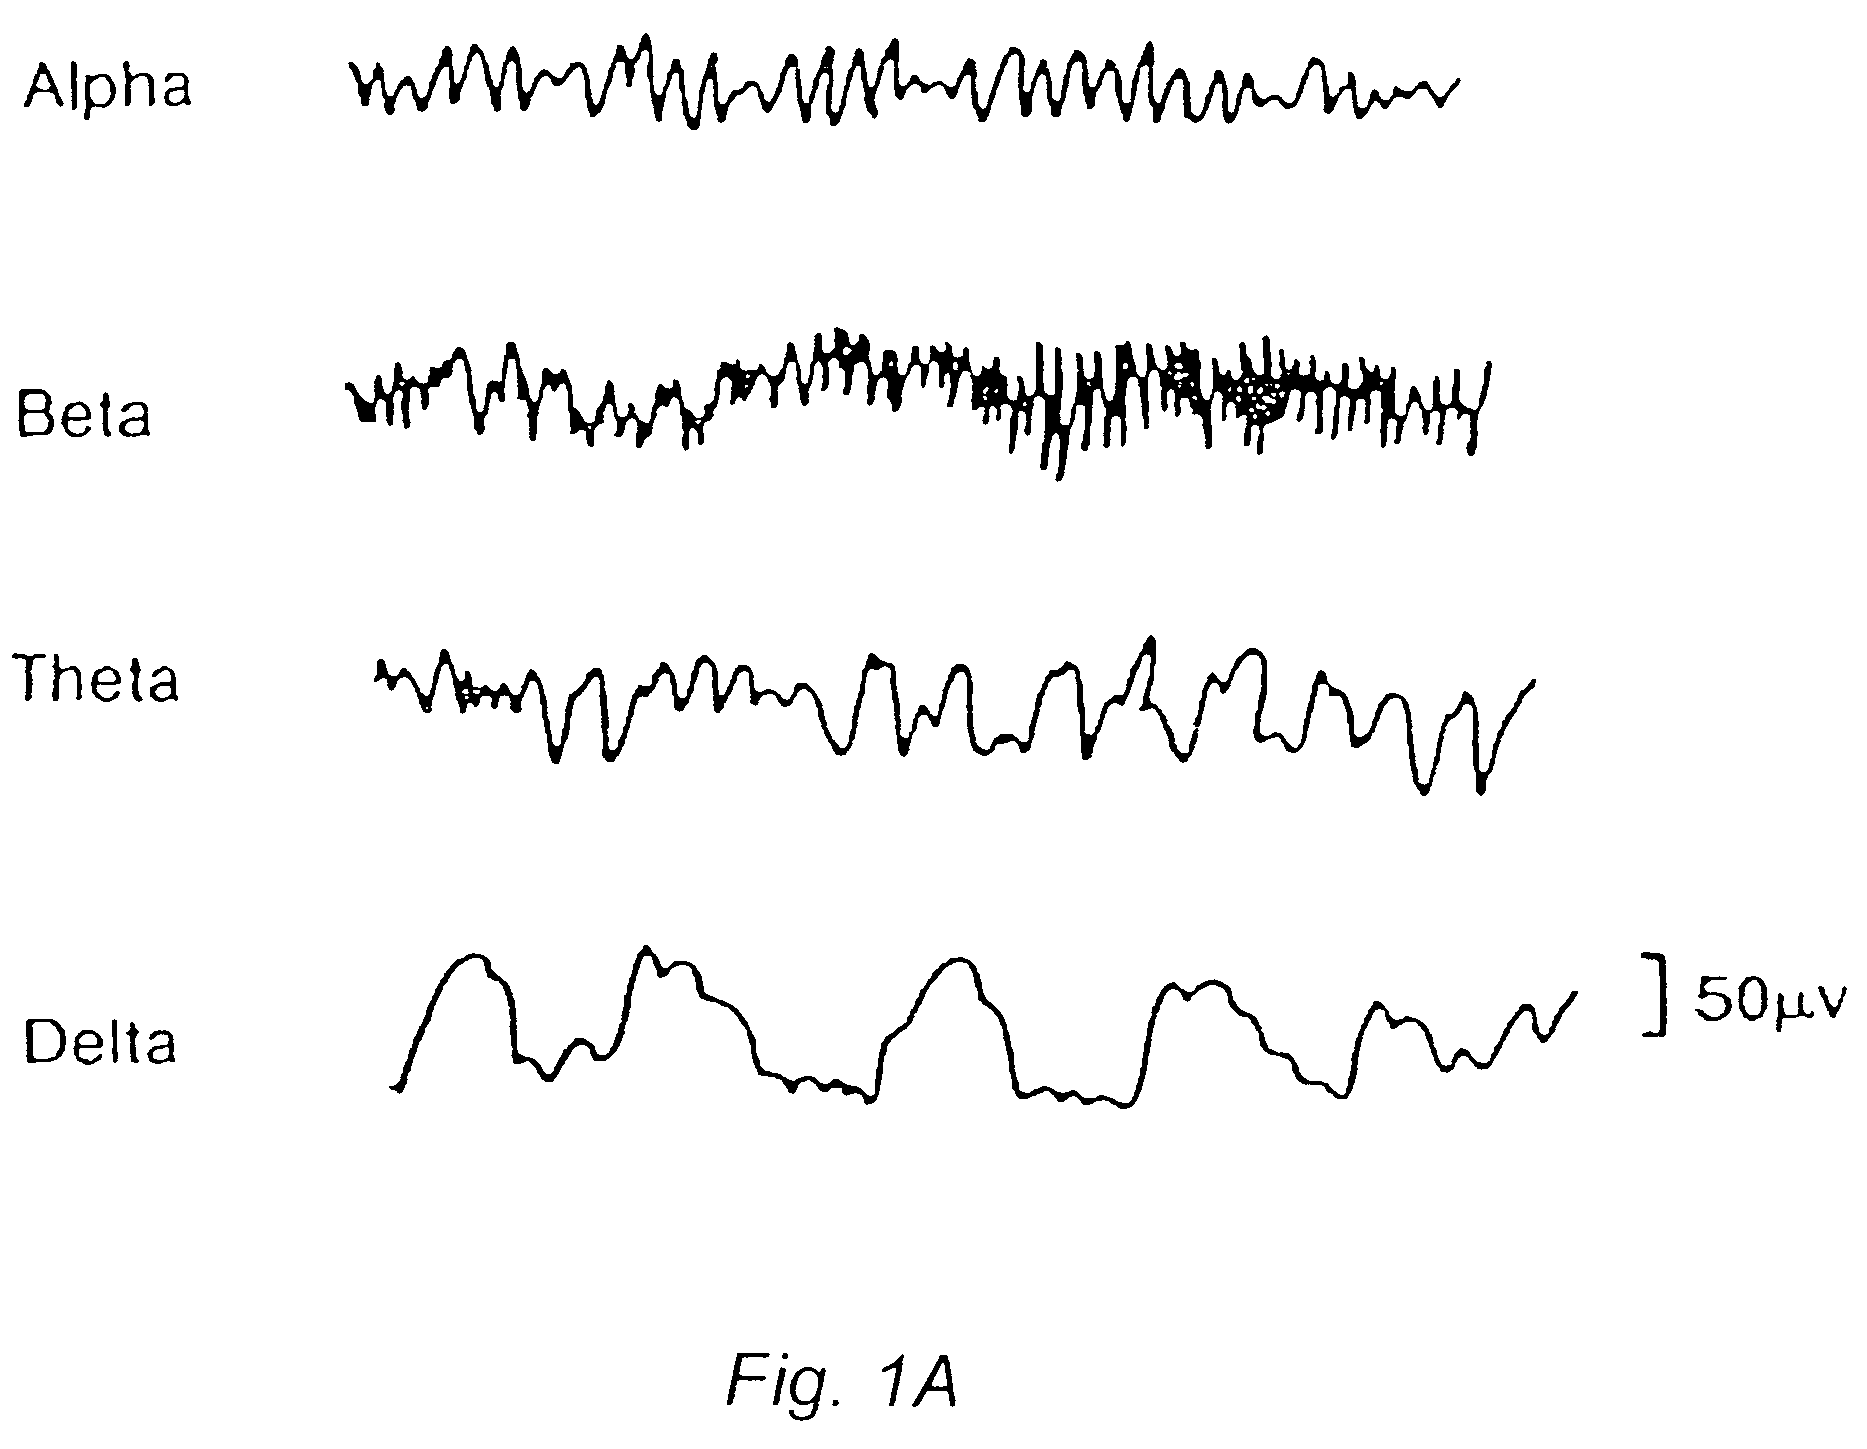 Method and system for analyzing and presenting an electroencephalogram (EEG)